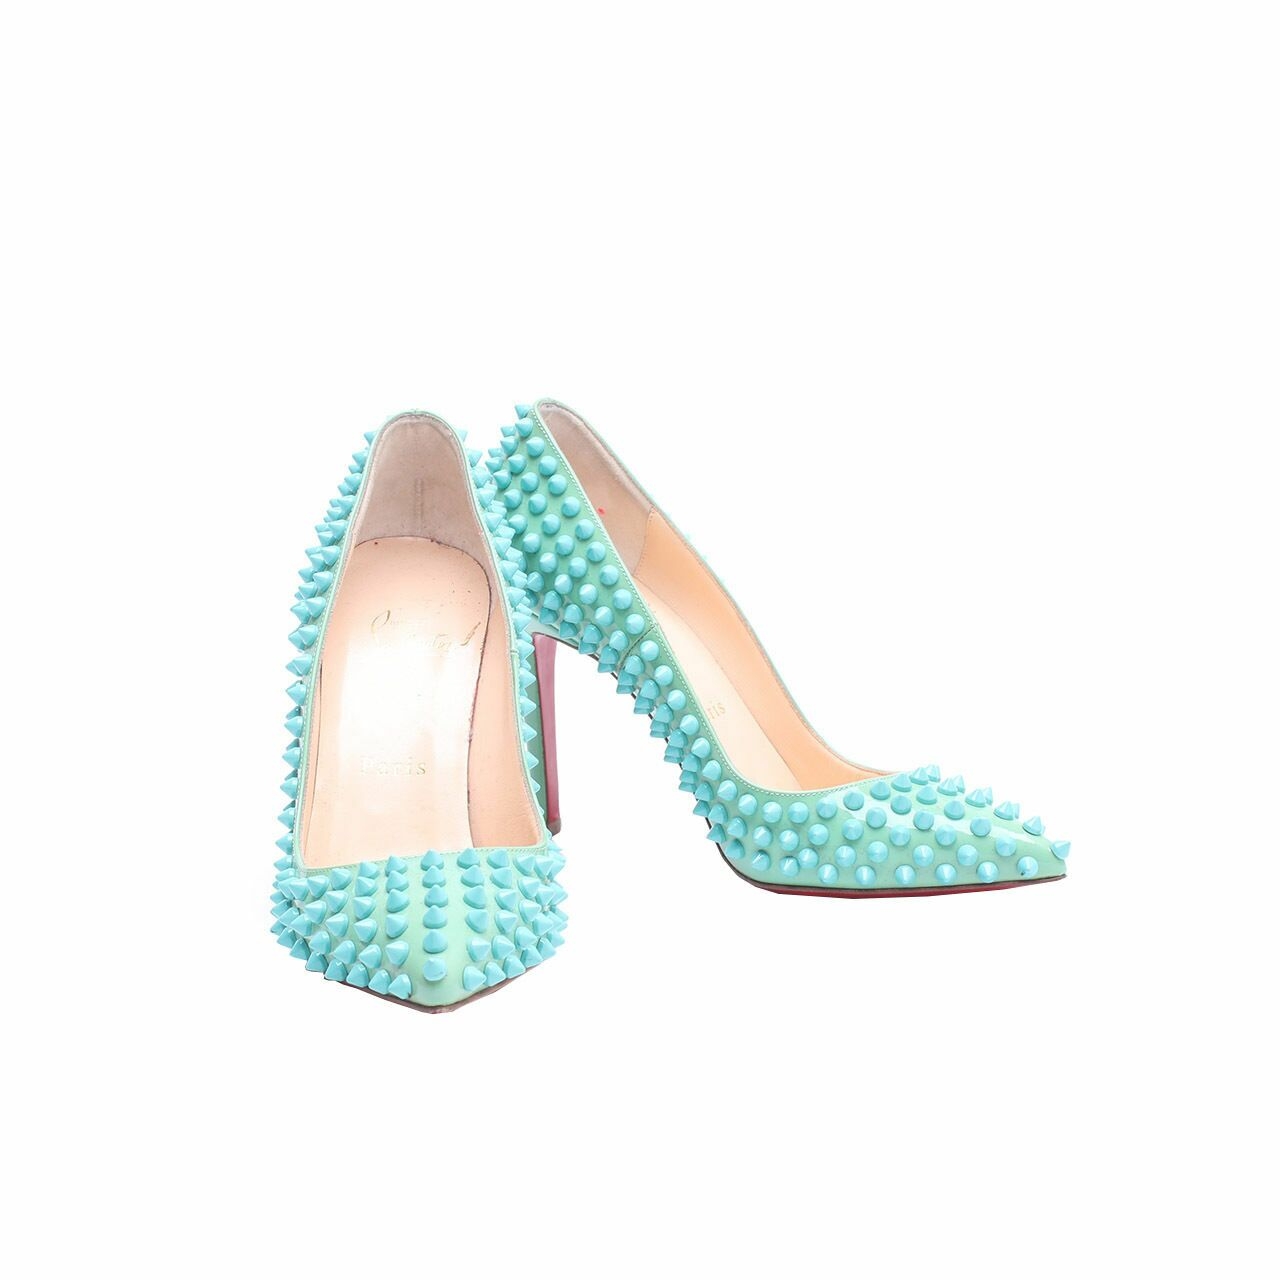 Christian Louboutin Spike Studded 100 Patent Leather Green Heels